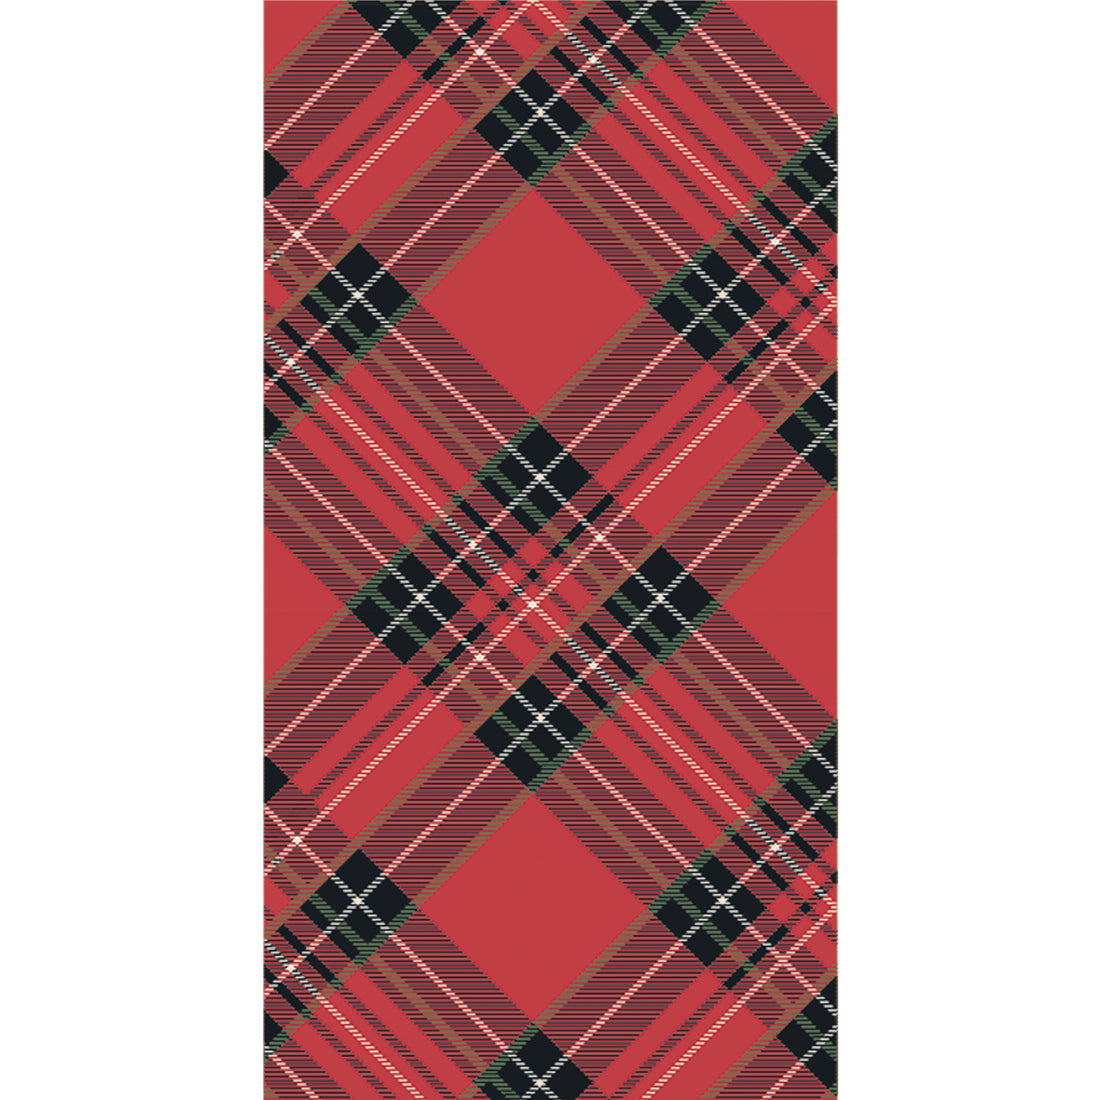 A rectangle cocktail napkin featuring a diagonal plaid pattern of black, white, gold and green over bright red.